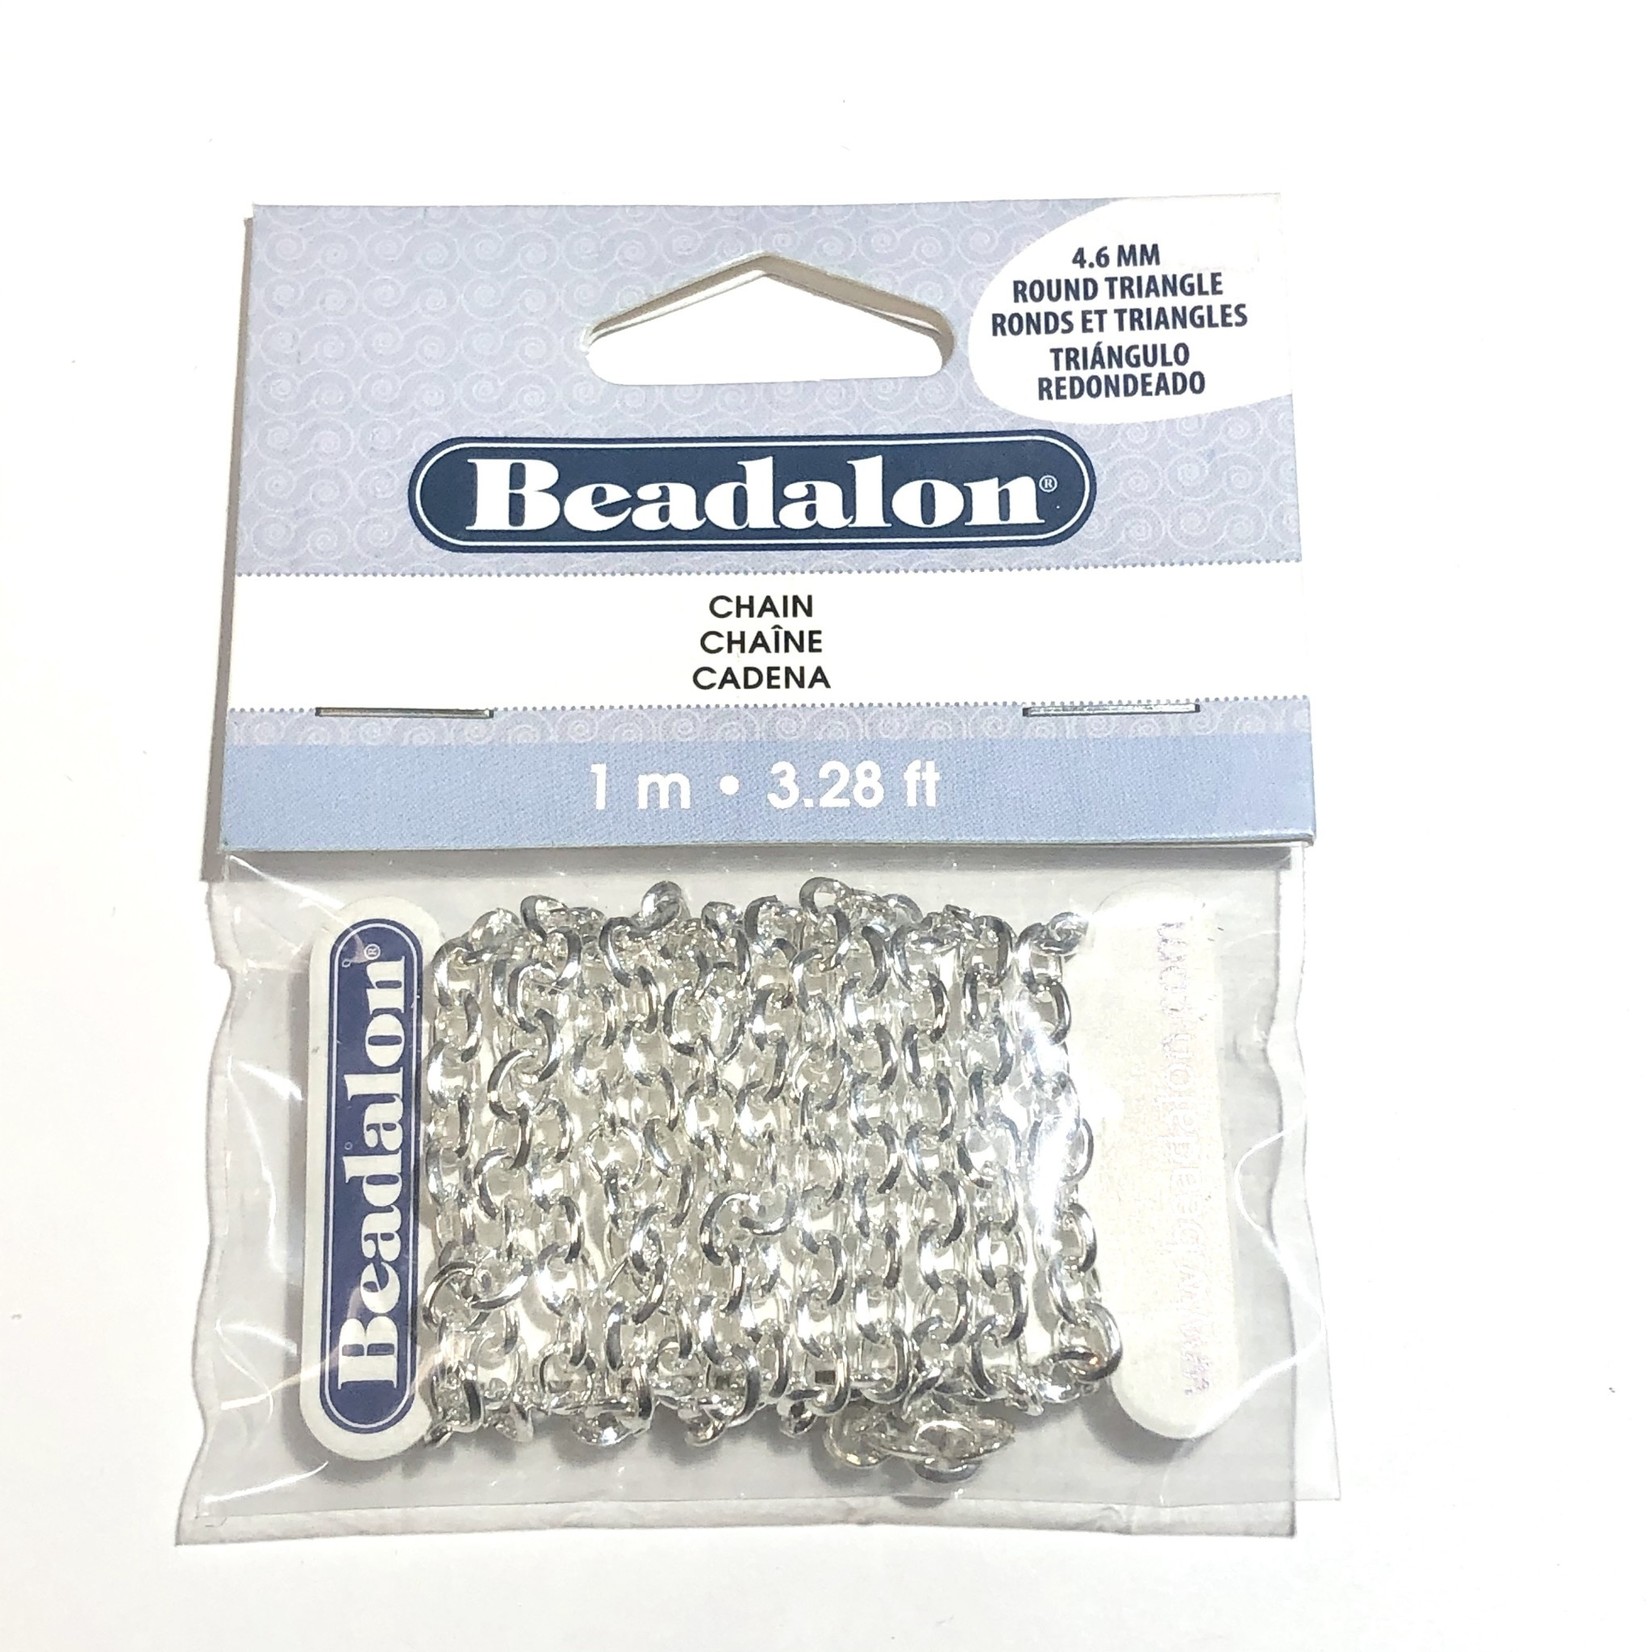 Beadalon Round Triangle Rope Chain 4.6mm Silver Plated 1m